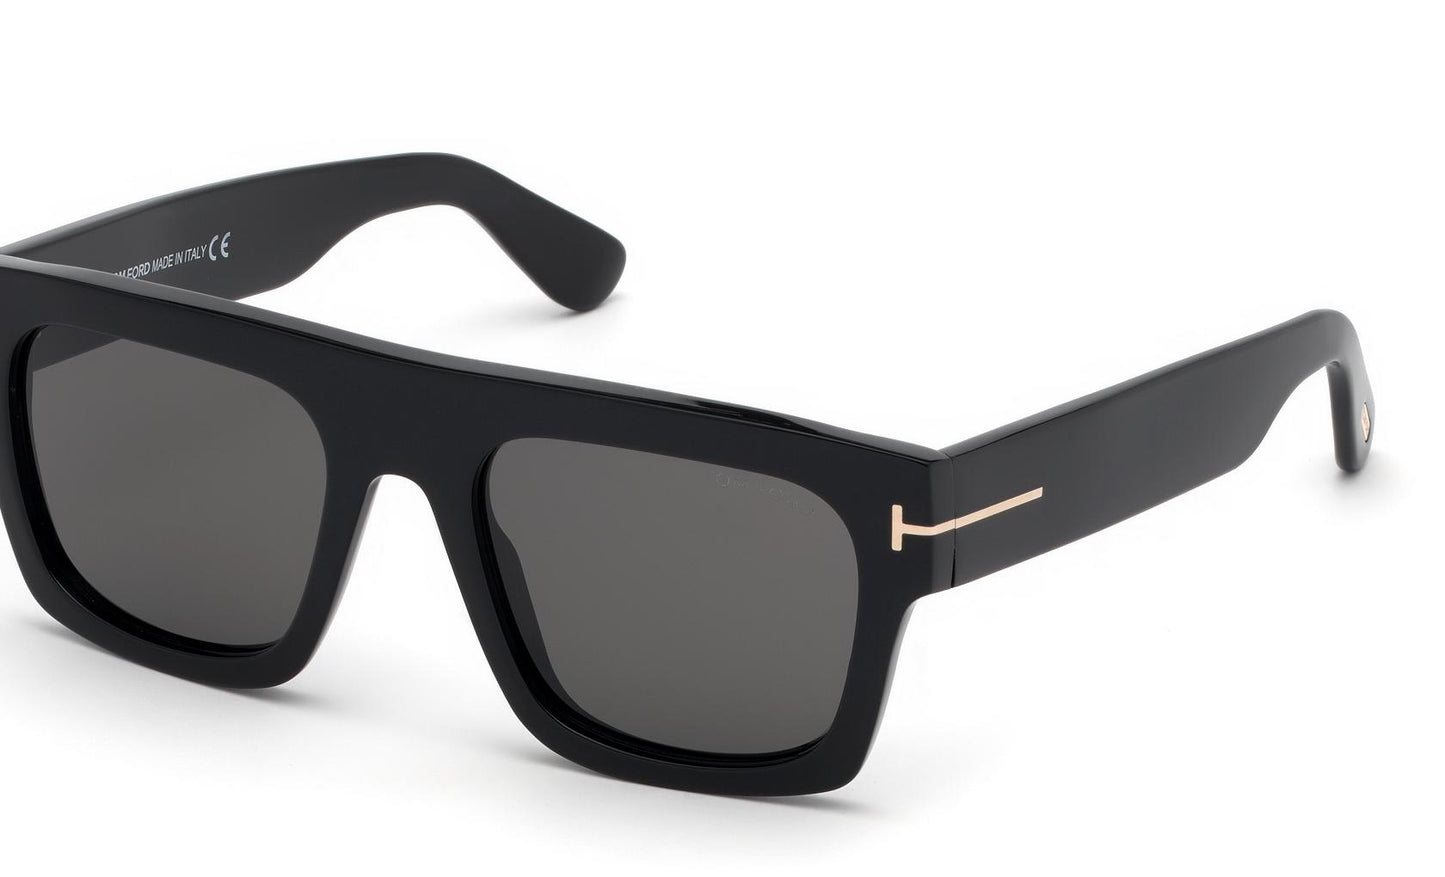 Tom Ford Fausto Sunglasses FT0711 01A